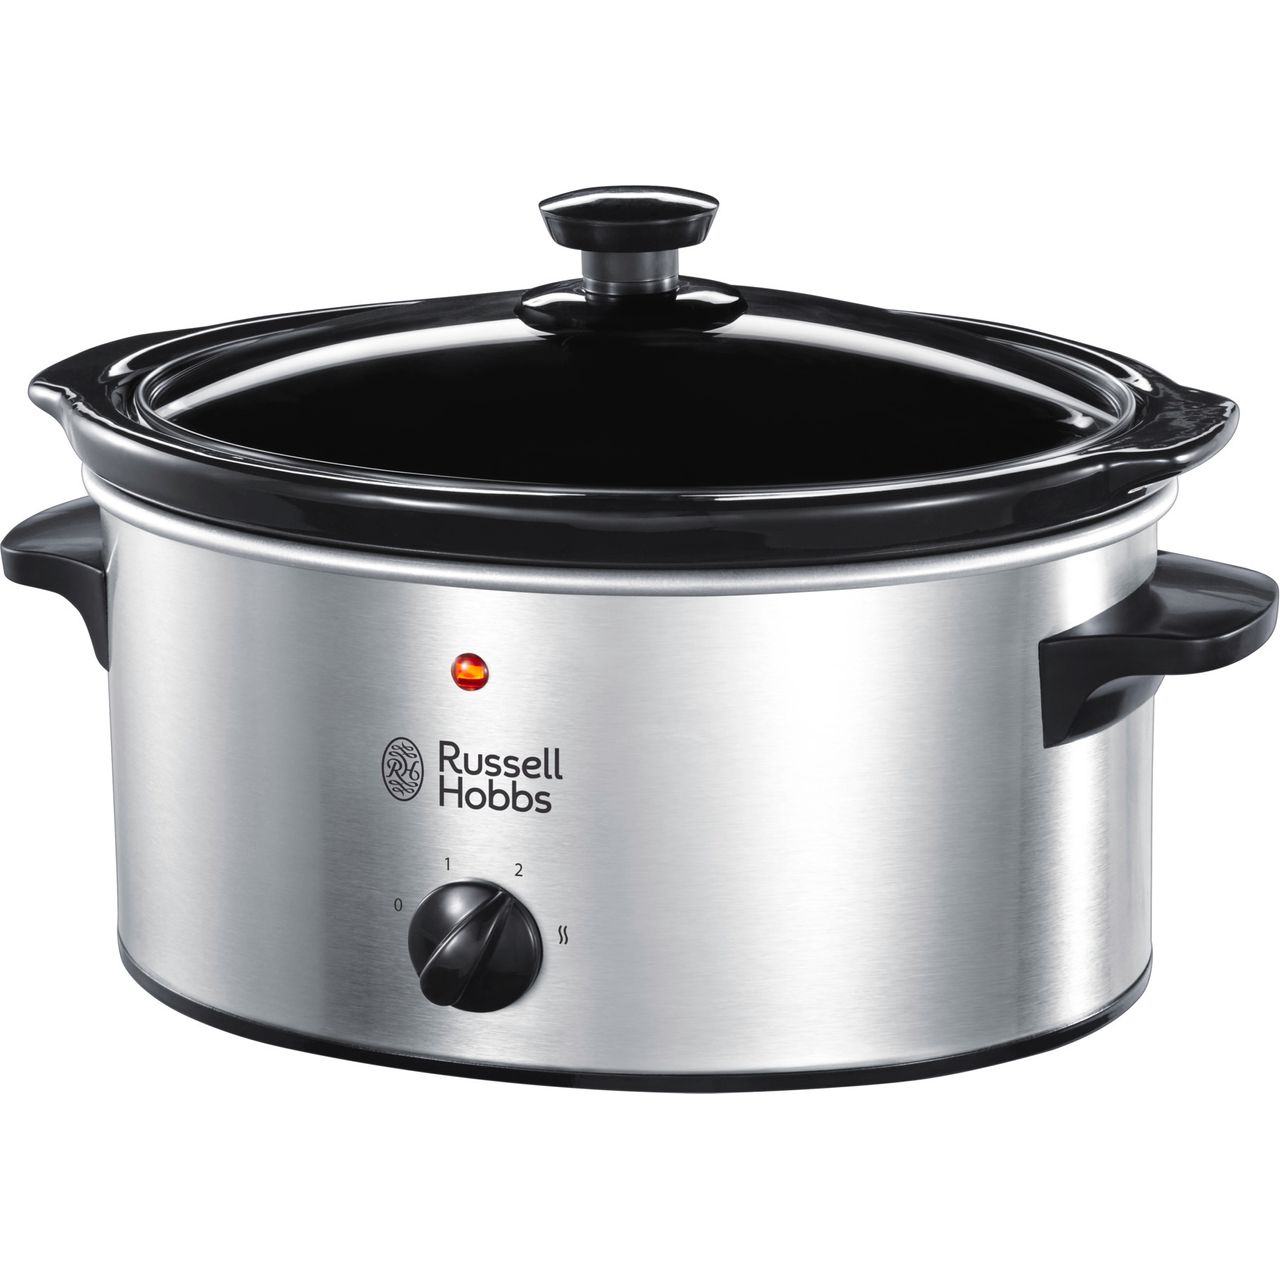 Russell Hobbs 23200 3.5 Litre Slow Cooker Review